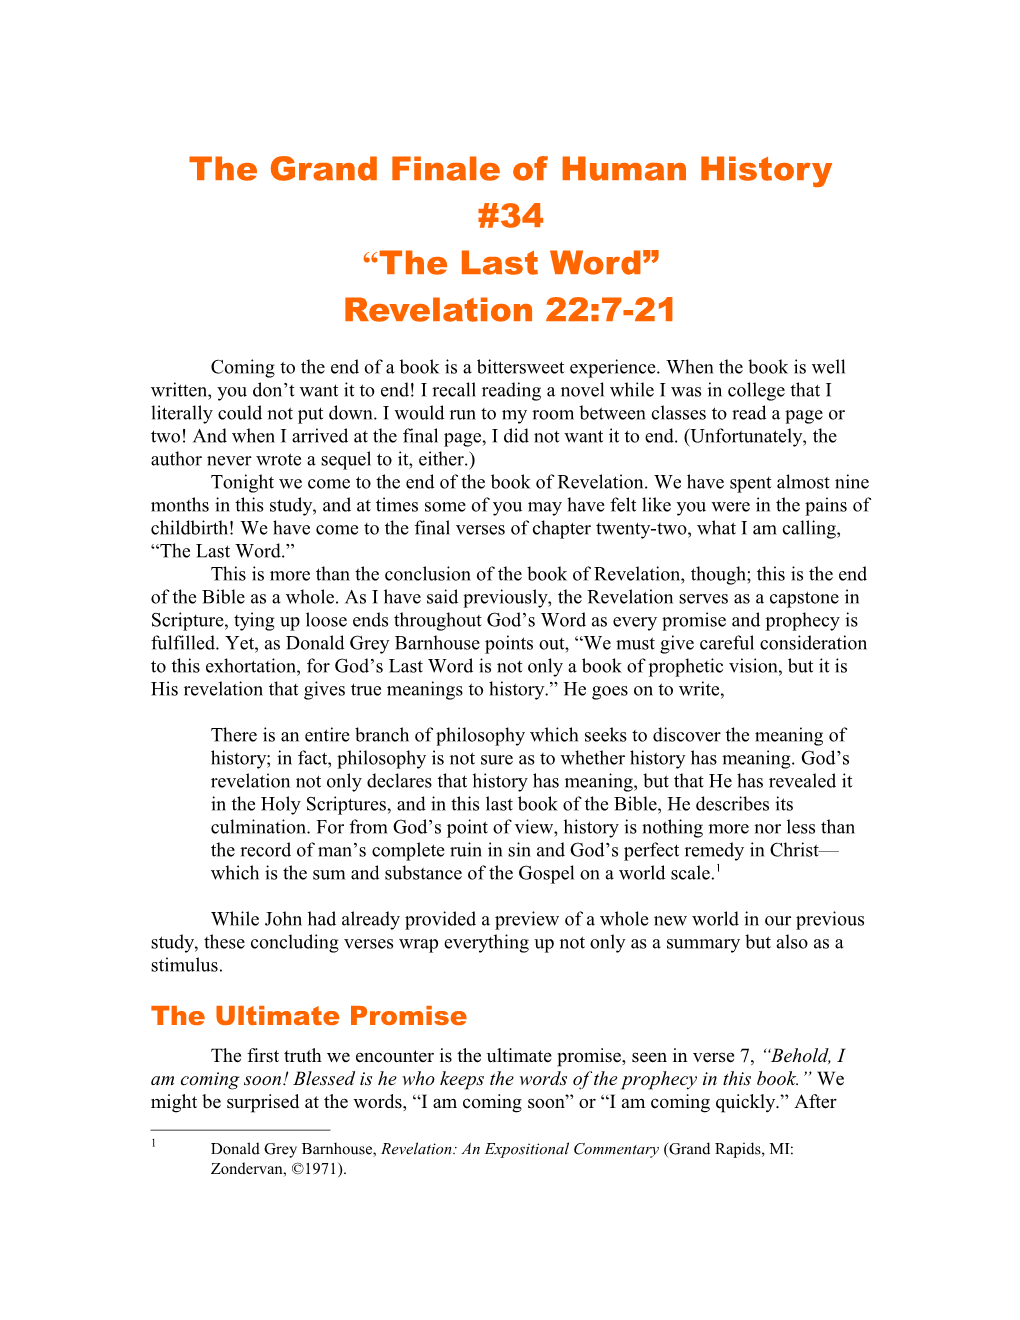 The Grand Finale of Human History #34